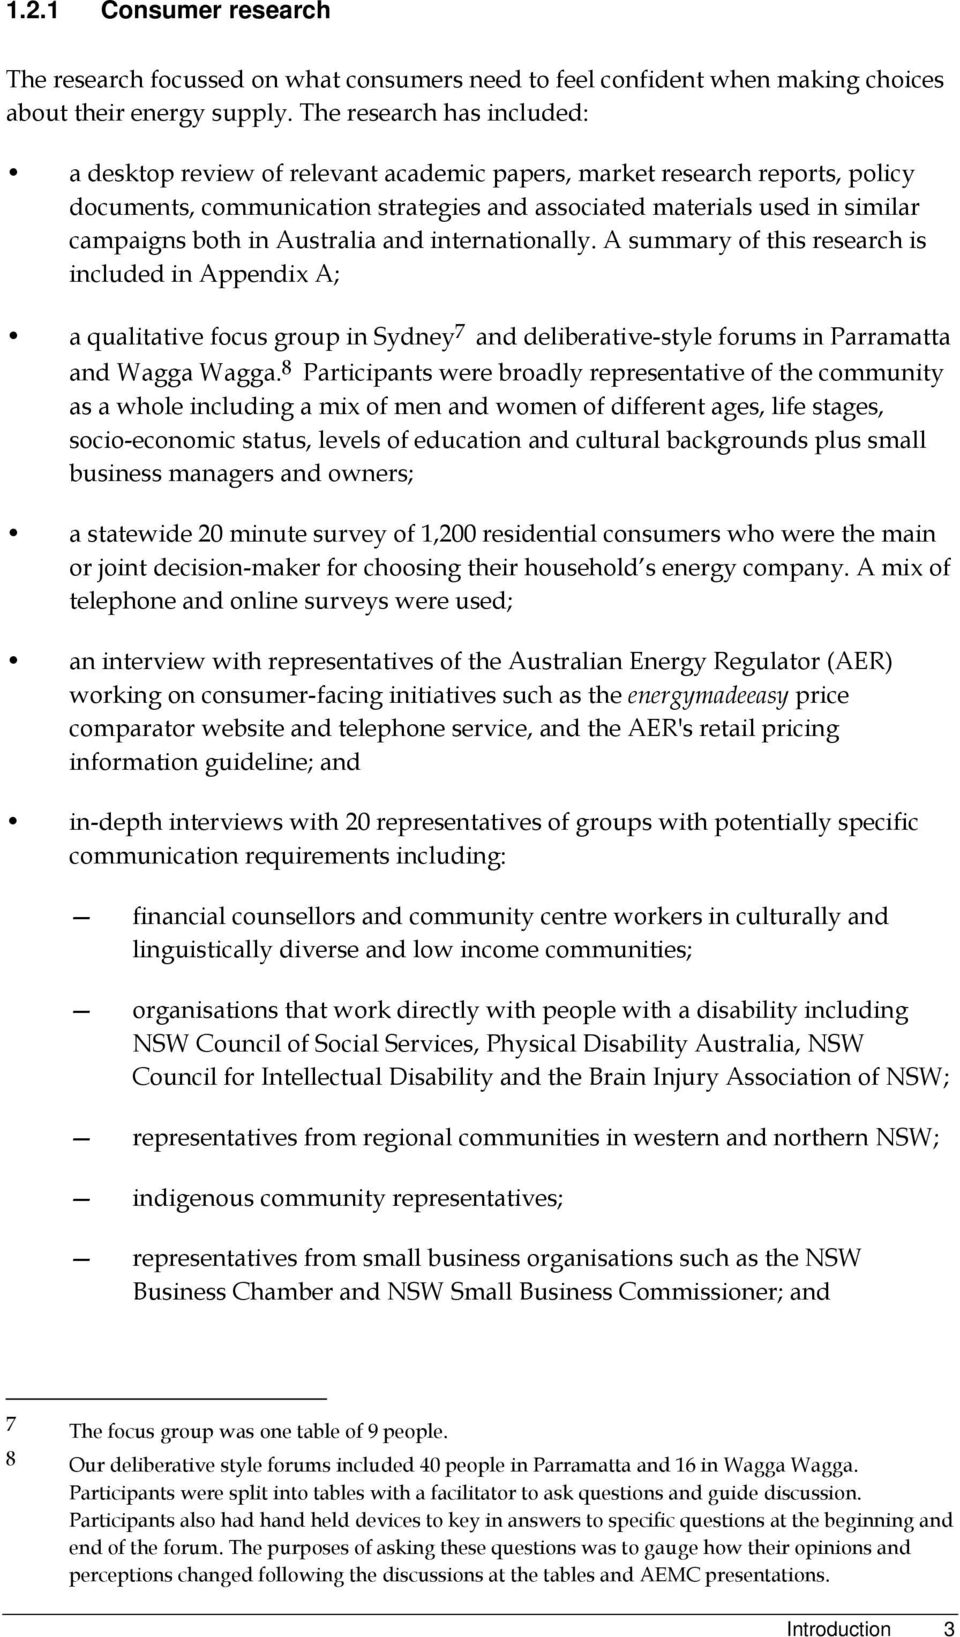 Australia and internationally. A summary of this research is included in Appendix A; a qualitative focus group in Sydney 7 and deliberative-style forums in Parramatta and Wagga Wagga.